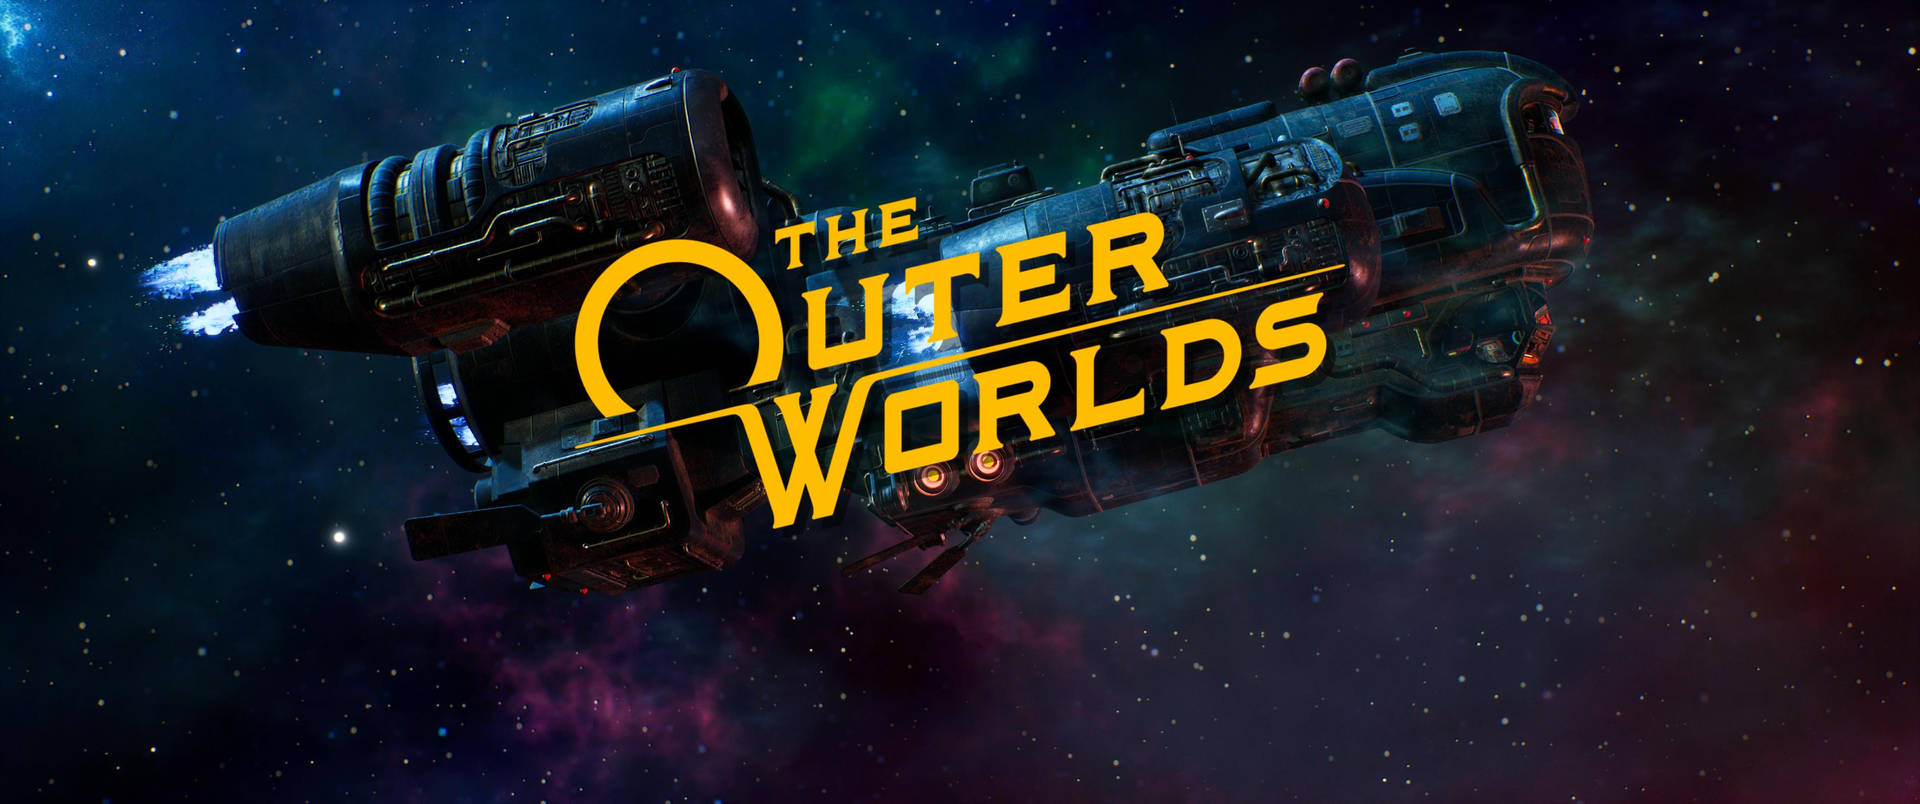 The Outer Worlds Title Screen Wallpaper